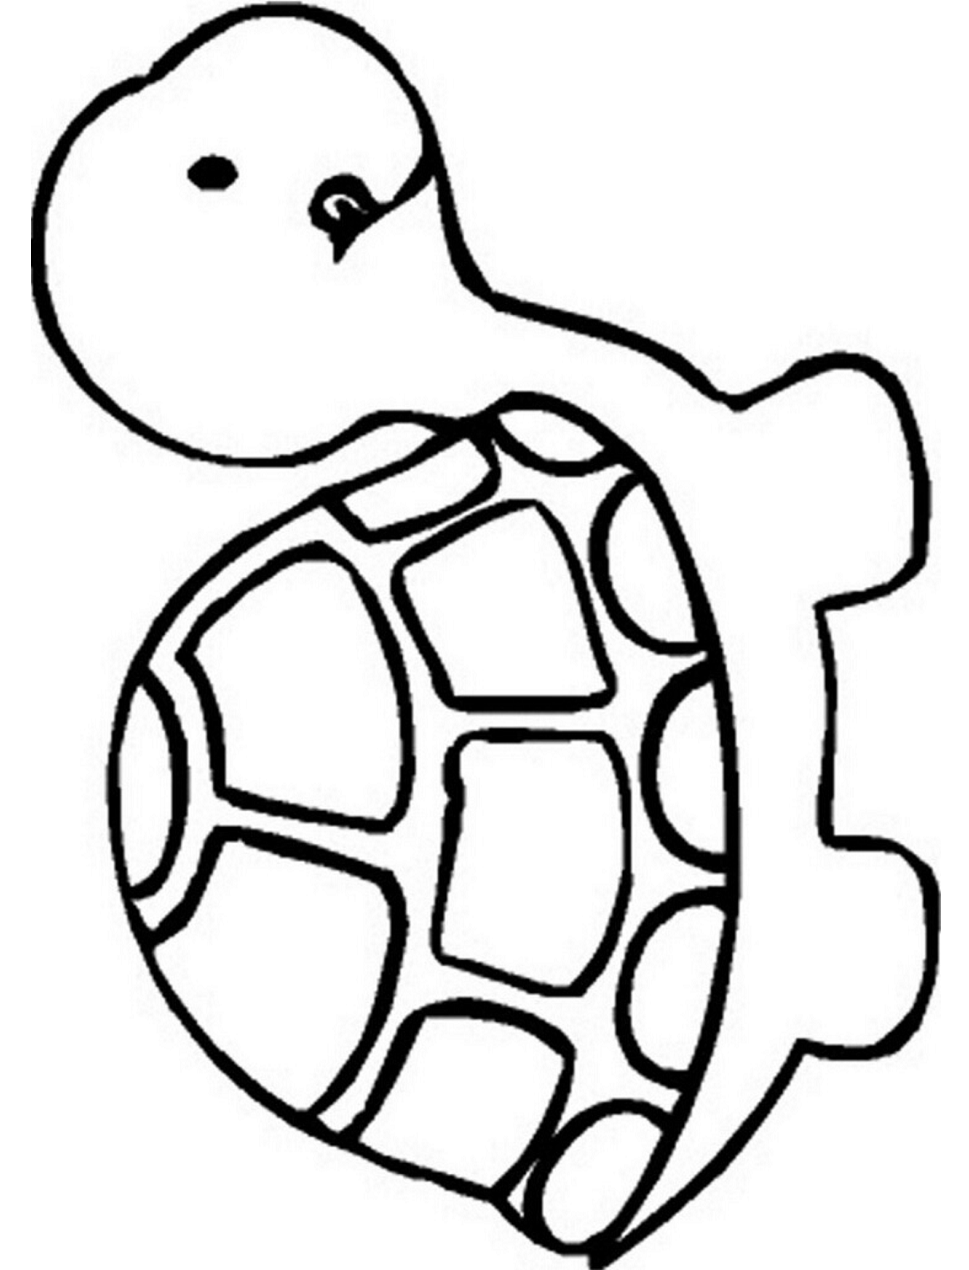 Turtle For Child Coloring Page - Free Printable Coloring Pages For Kids